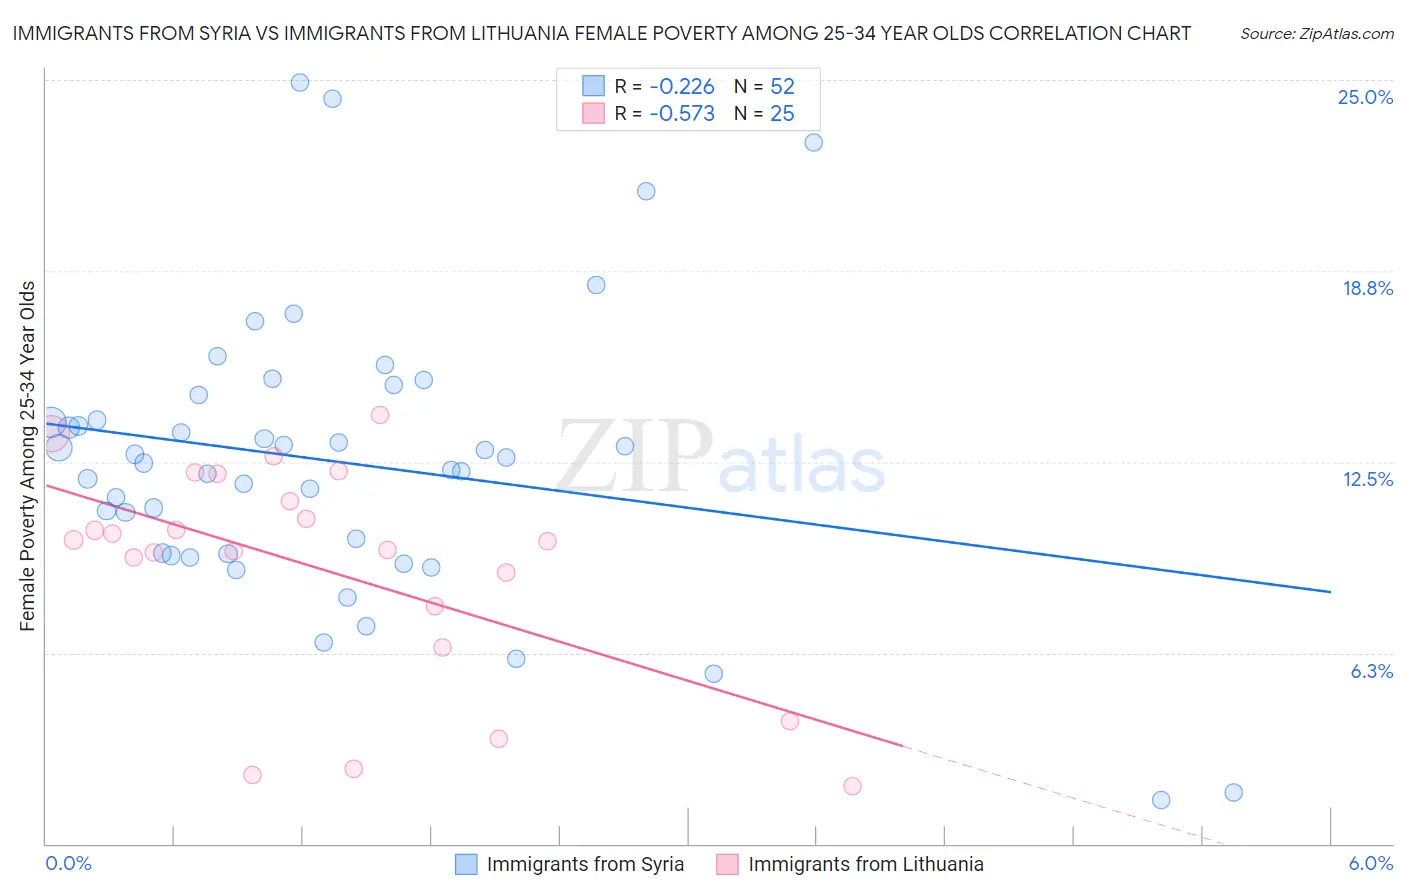 Immigrants from Syria vs Immigrants from Lithuania Female Poverty Among 25-34 Year Olds